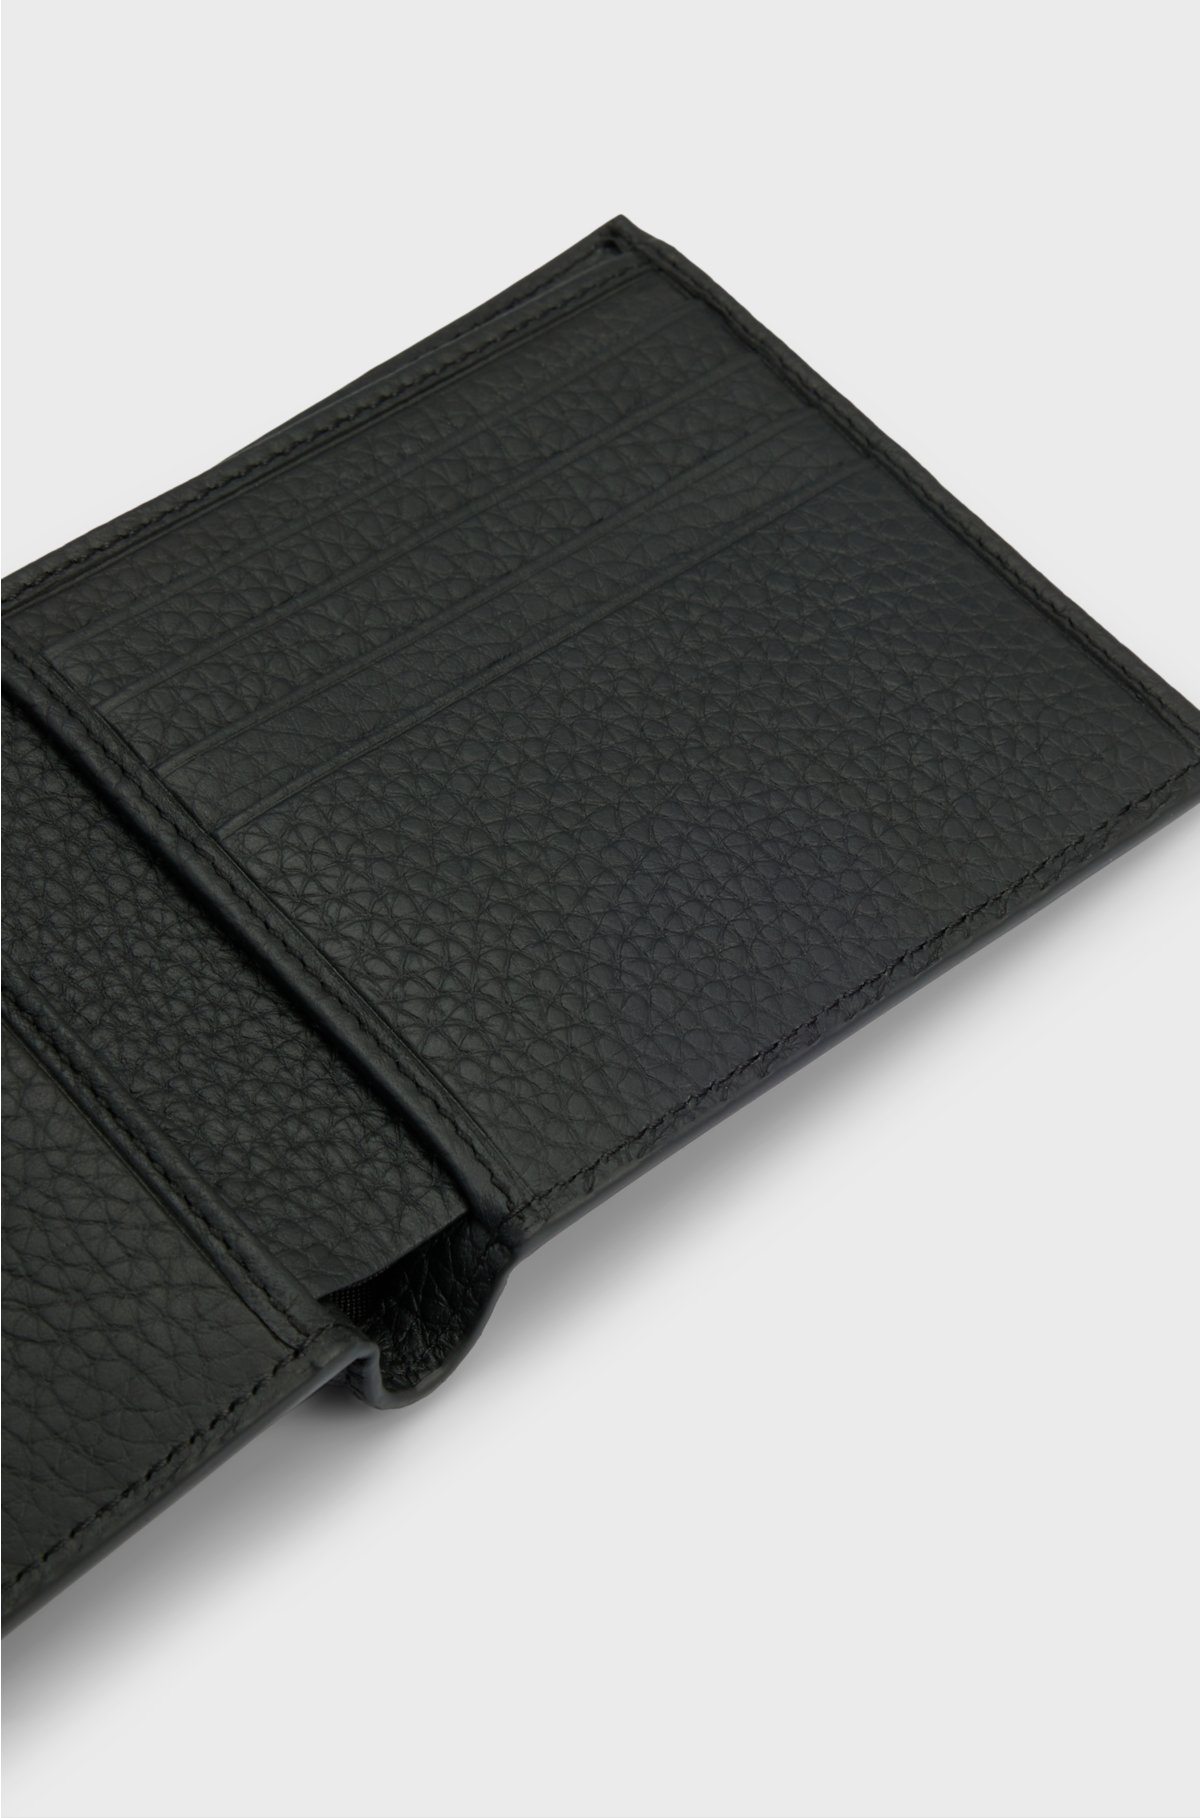 Grained Italian-leather wallet with logo lettering, Black